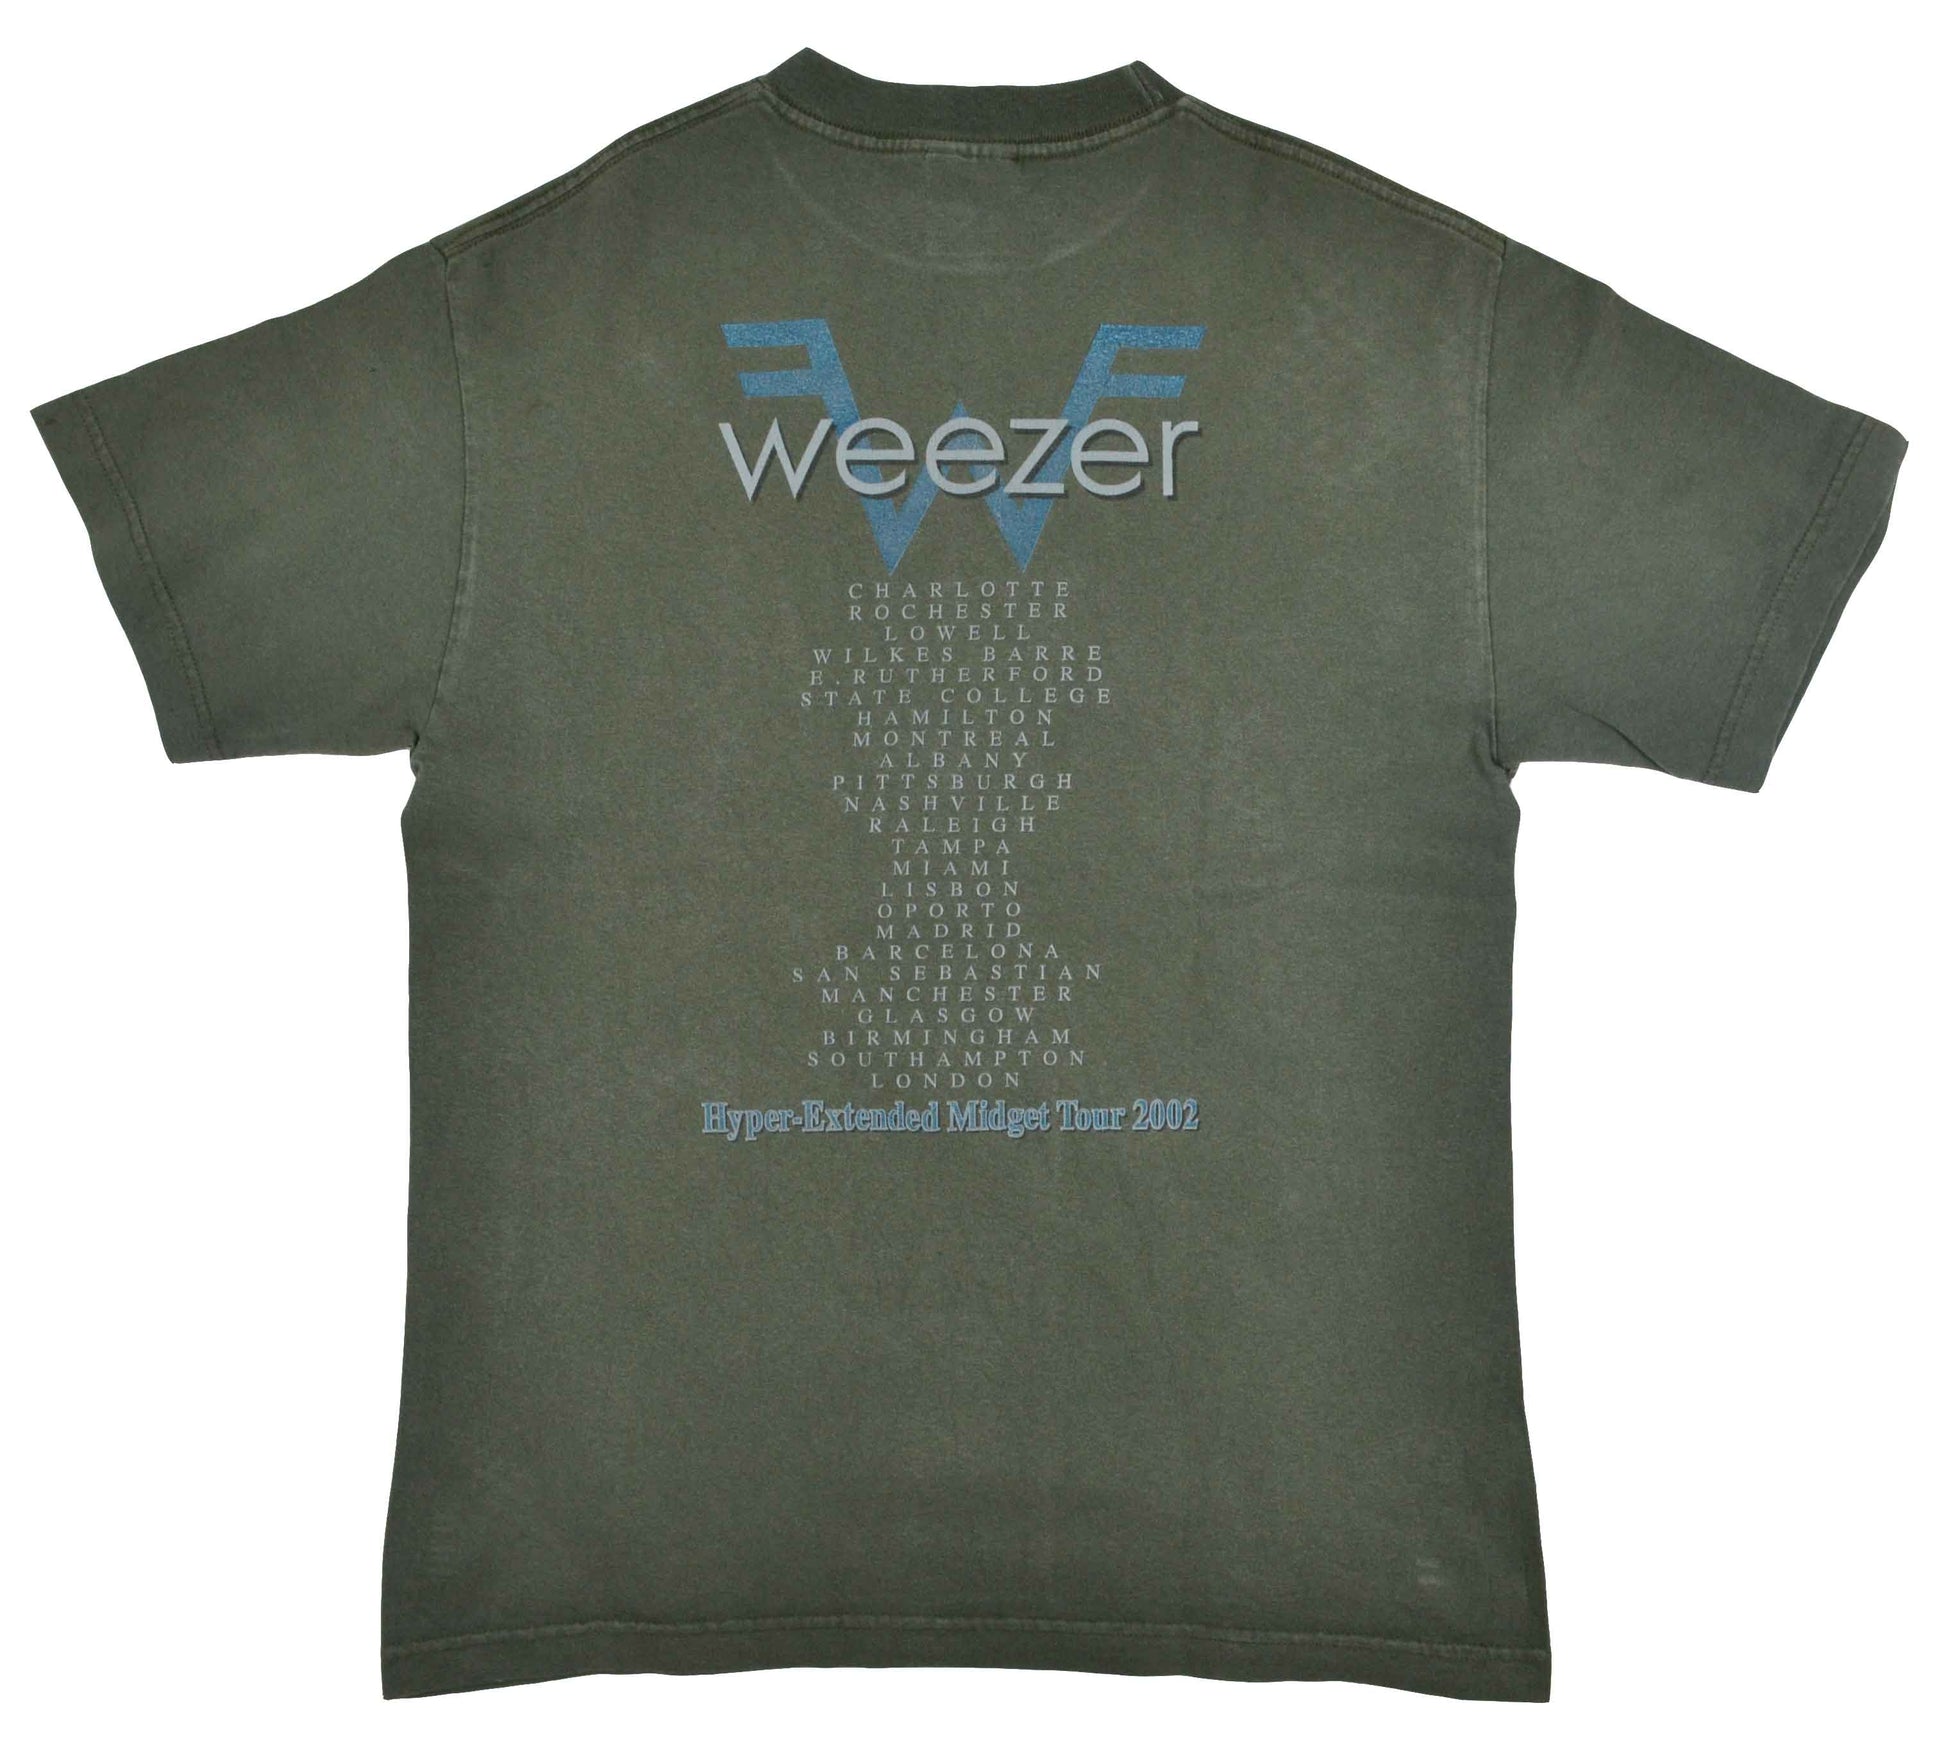 Vintage Band T-Shirt 2002 Weezer "Hyper-Extended Midget" Tour   The Hyper-Extended Midget Tour supported the third studio album from the band, Green Album. With a more pop sound,  the album was a commercial success and received mostly positive reviews by the fans. It debuted at number four in the United States and the song Hash Pipe was a worldwide hit, charting on seven different charts. The tee has a really good vintage look.